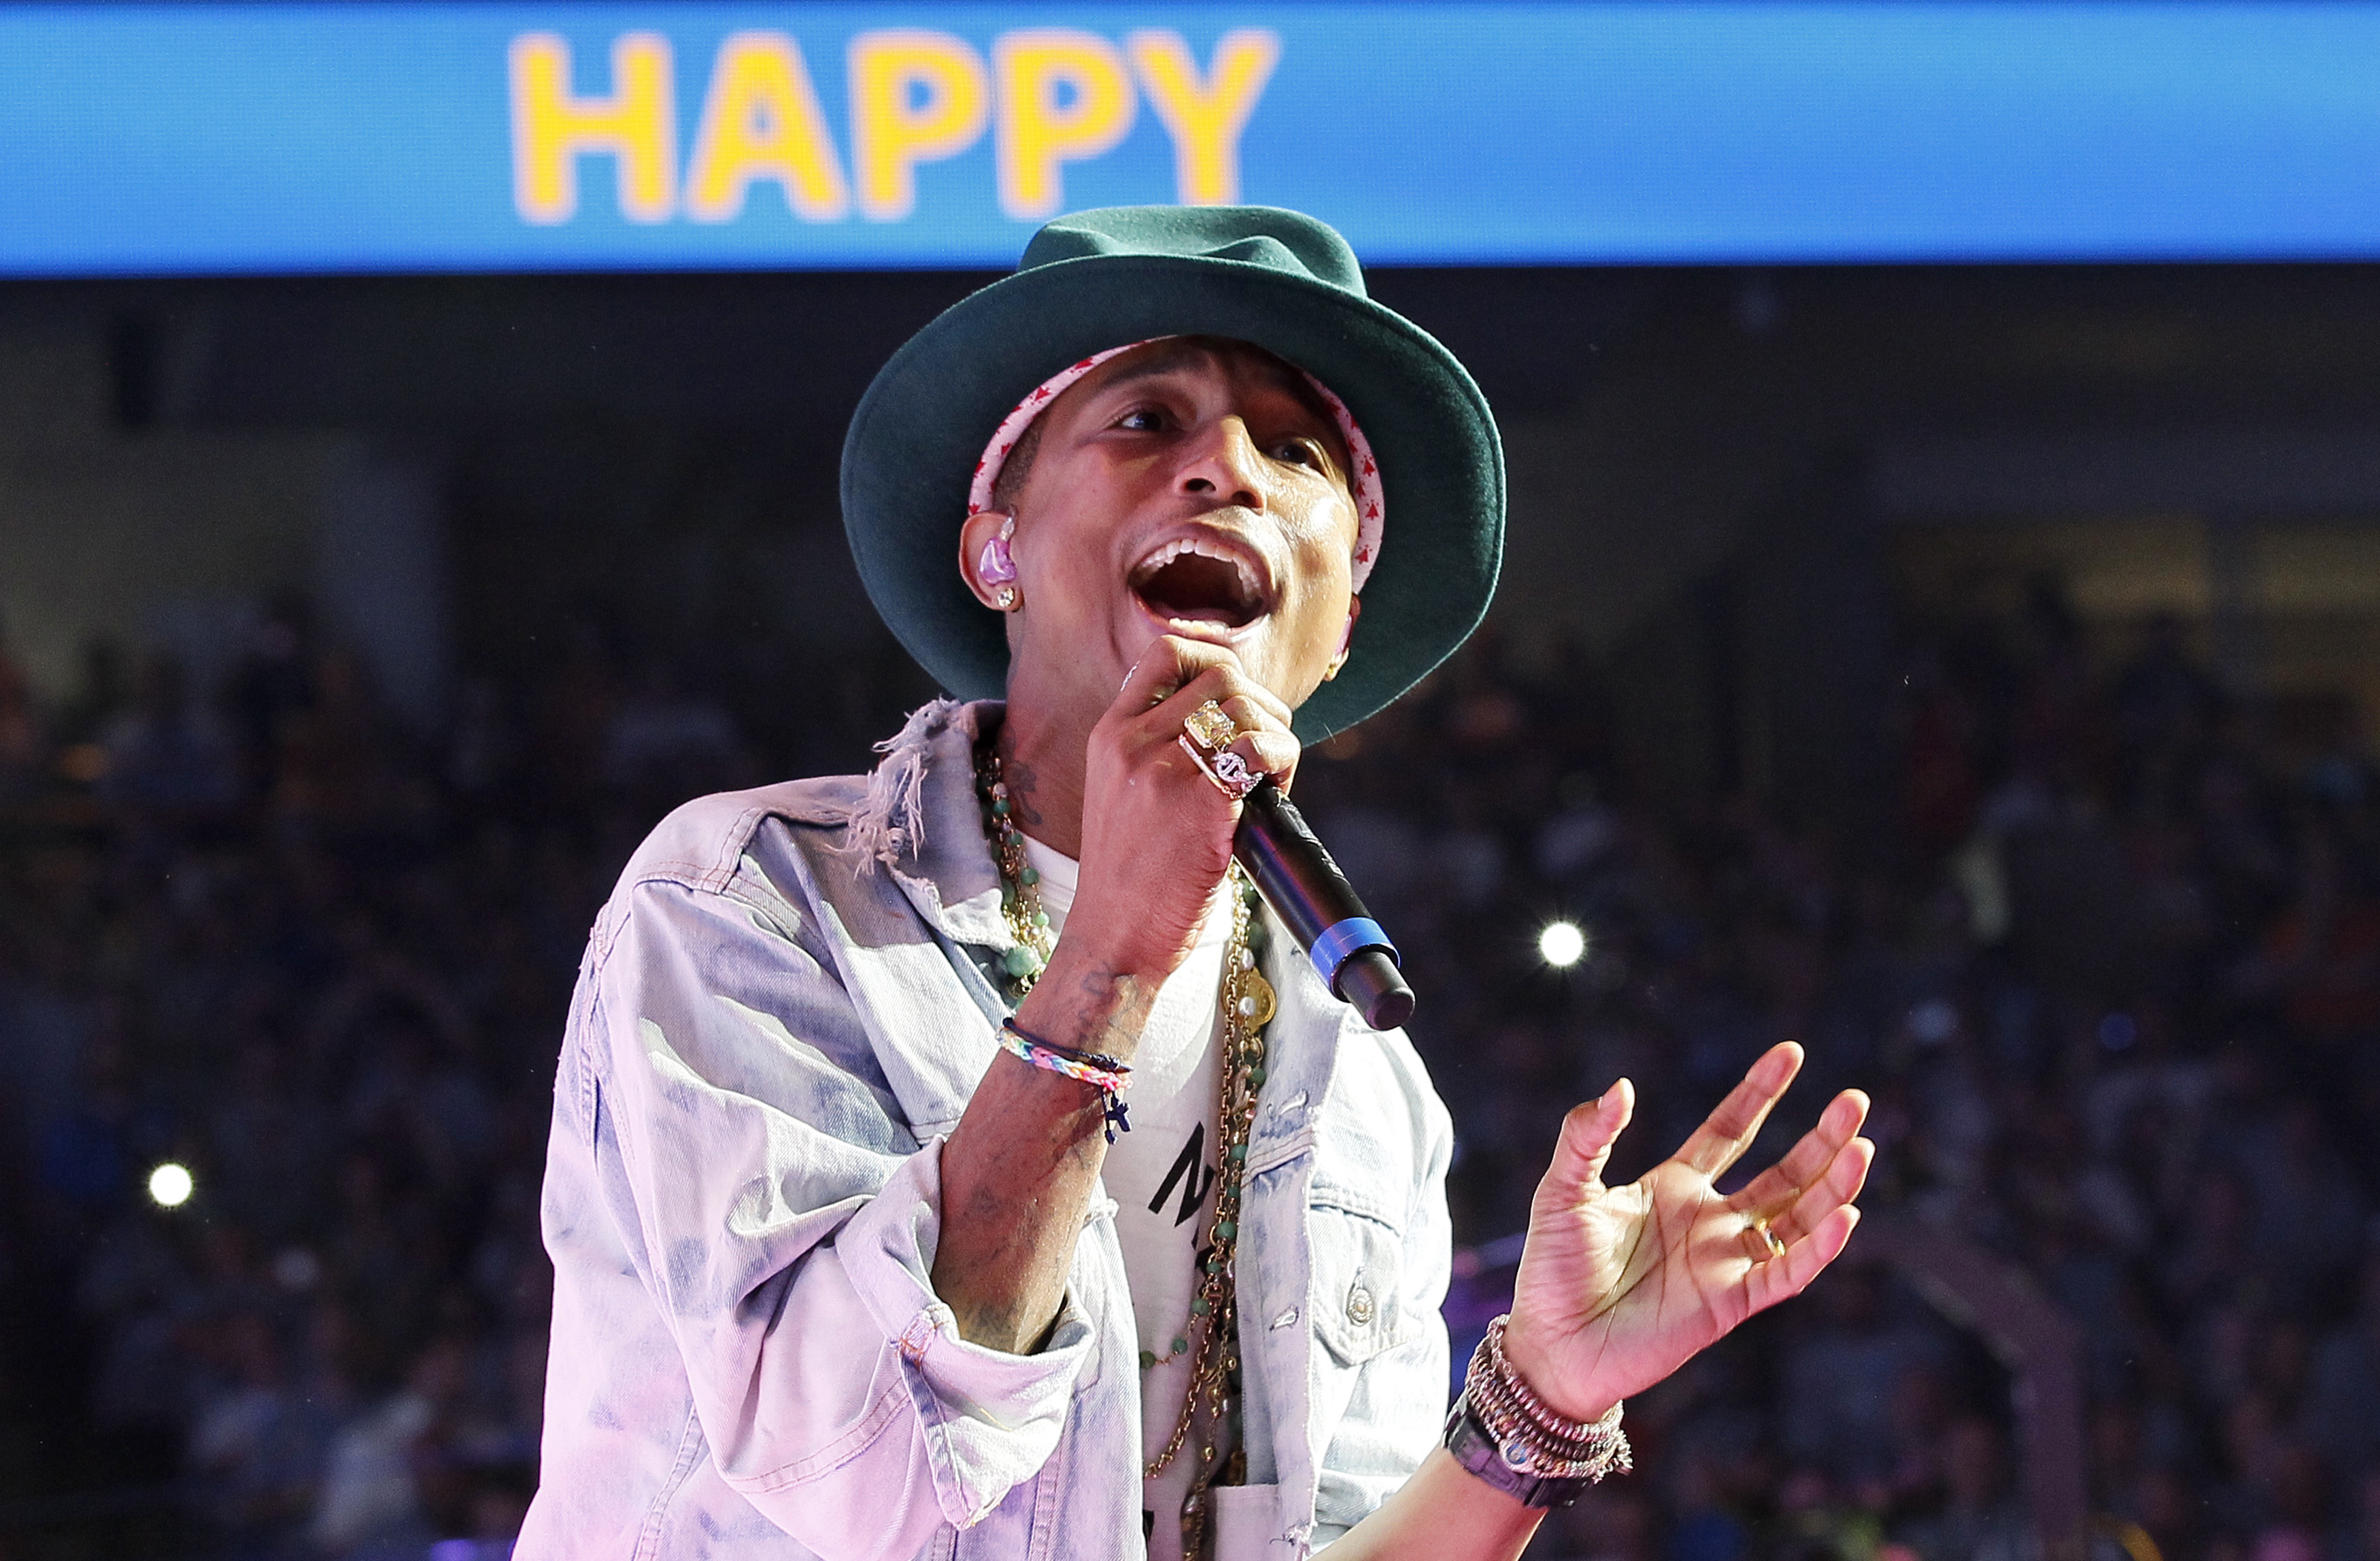 Singer Pharrell Williams performs his hit song "Happy" at the Walmart annual shareholders meeting in Fayetteville